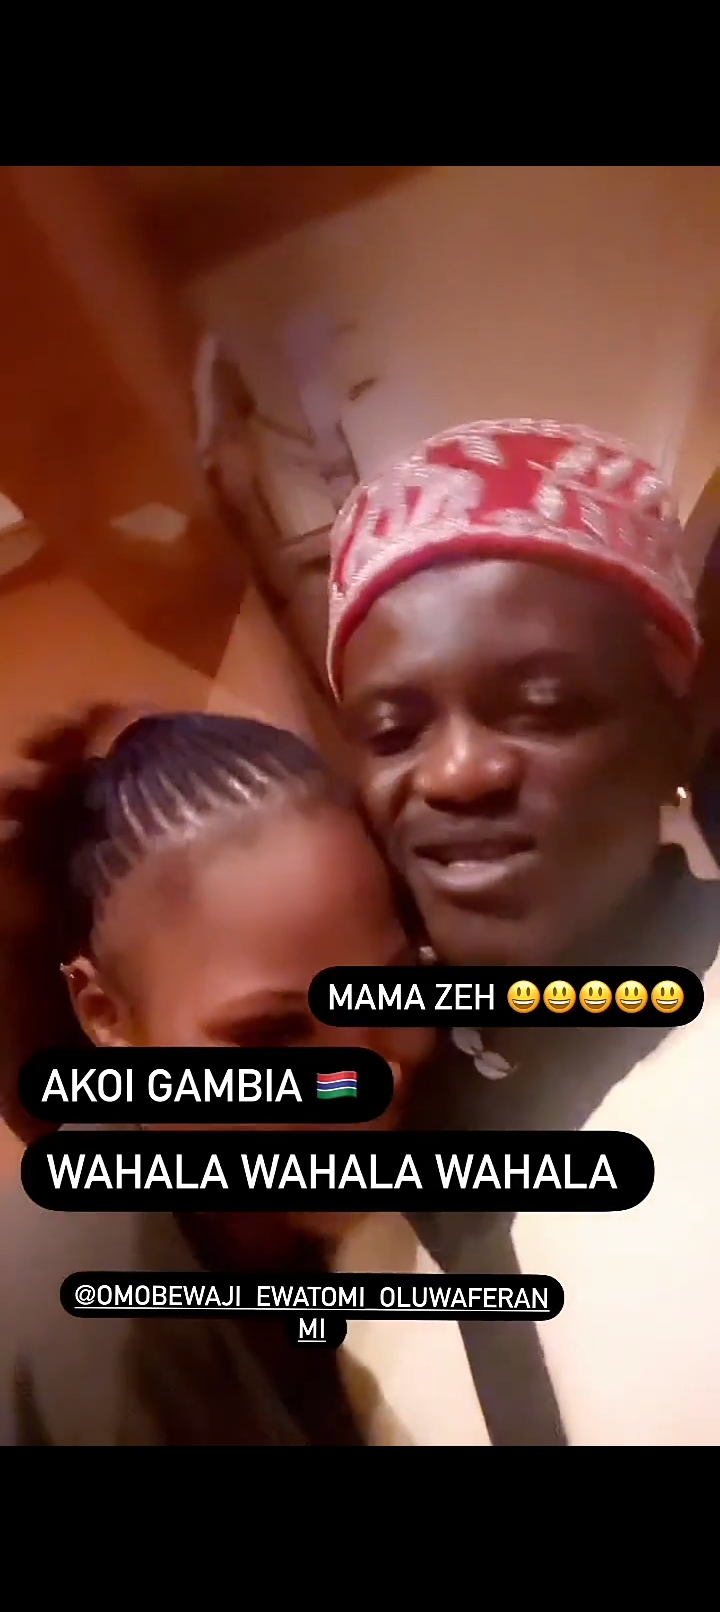 Singer Portable Shows Off his romantic side with wife ( Video) 